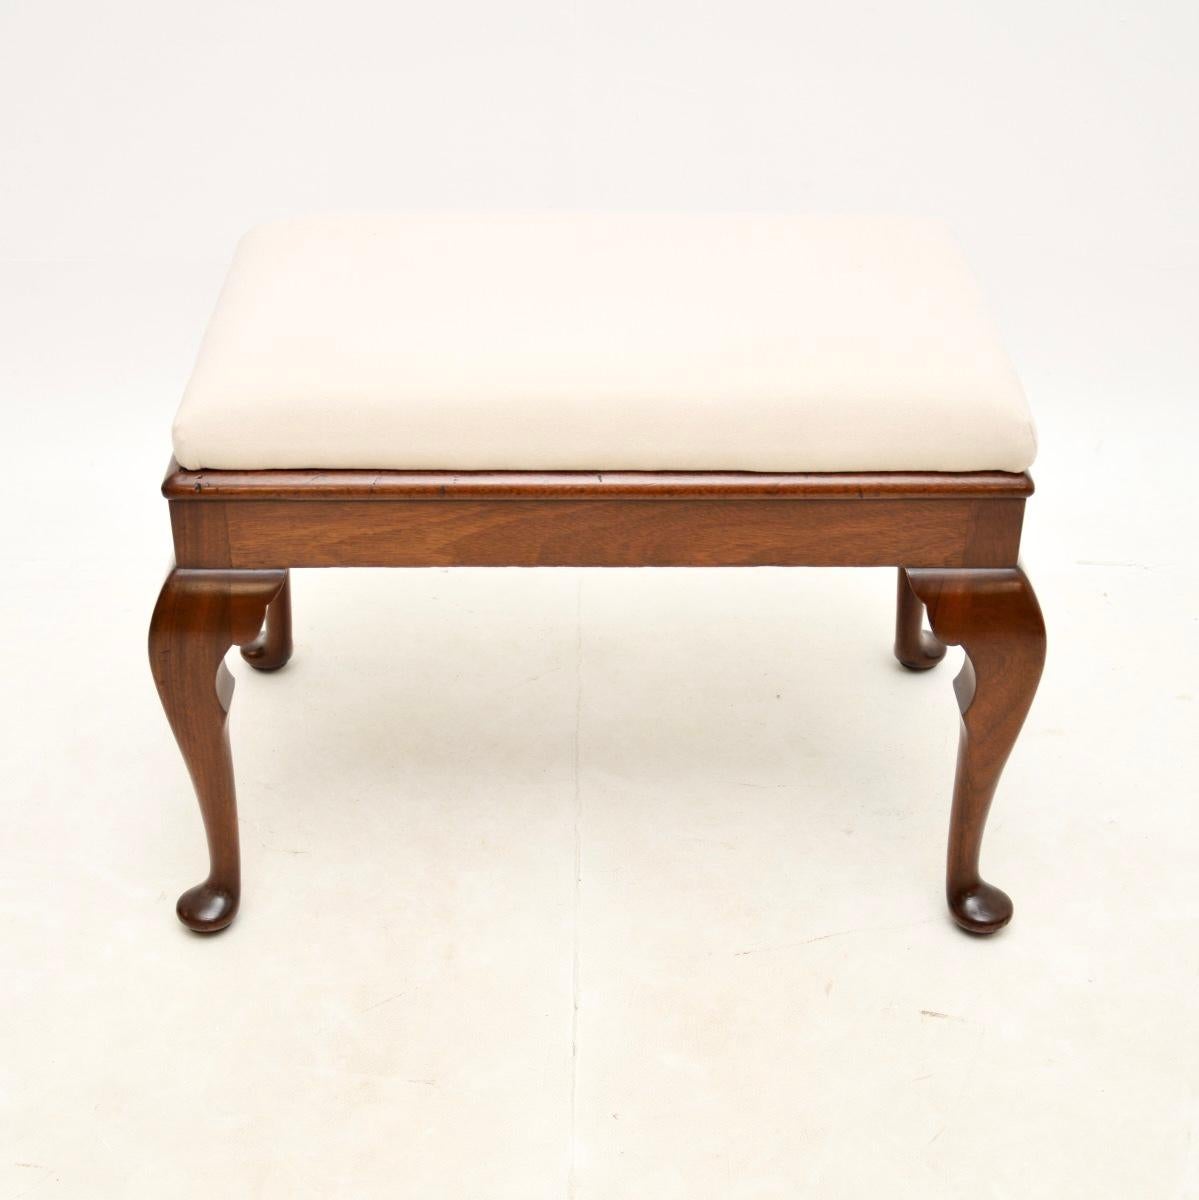 A fine quality and beautifully designed antique Edwardian stool. This was made in England, it dates from around the 1900-1910 period.

It is extremely well made, the frame is very well constructed and this is a useful size. This stool could even be